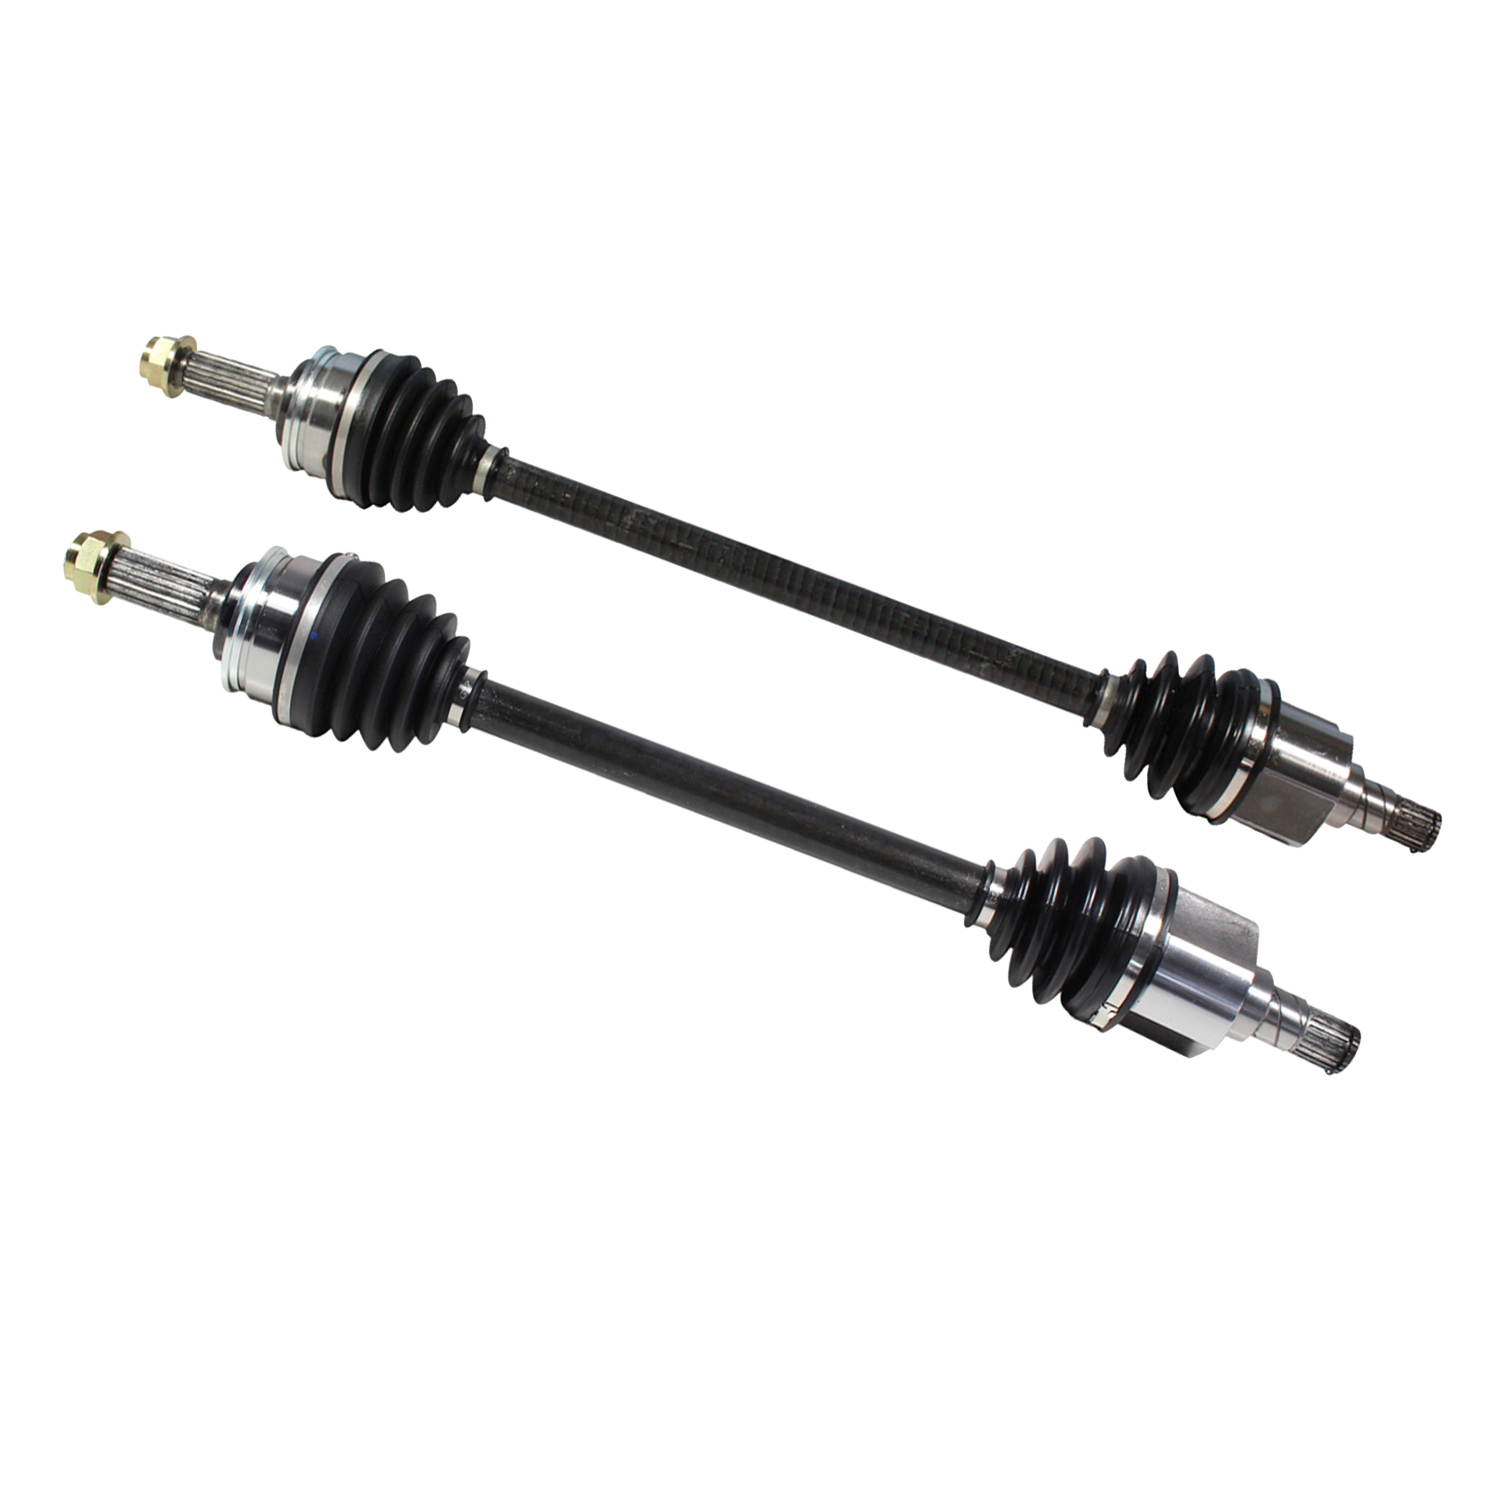 FRONT LEFT /& RIGHT CV Axle Shaft For GEO METRO 90-94 Standard Transmission